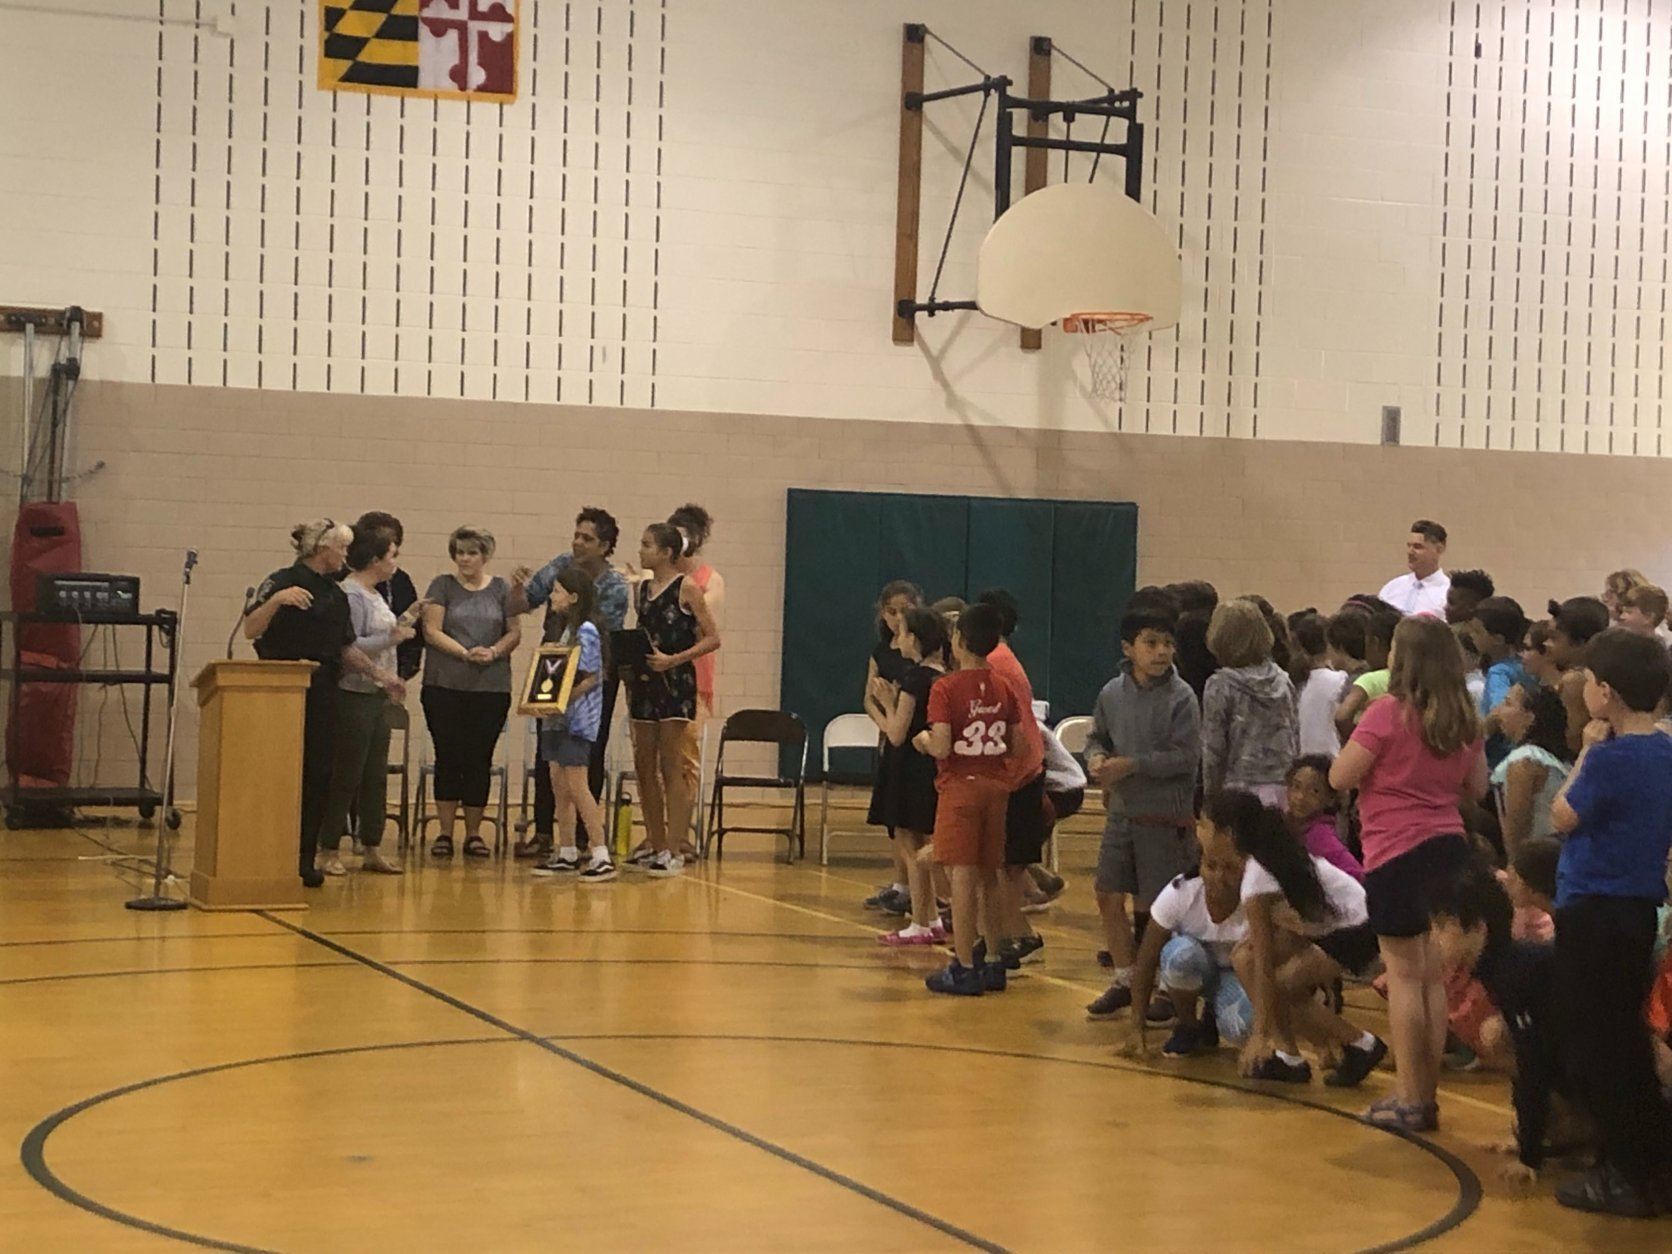 Two Oakland Terrace Elementary School students were recognized Tuesday in Silver Spring, Maryland, for their quick thinking while patrolling just outside the school after a kindergartner ran toward oncoming traffic. (WTOP/Melissa Howell)